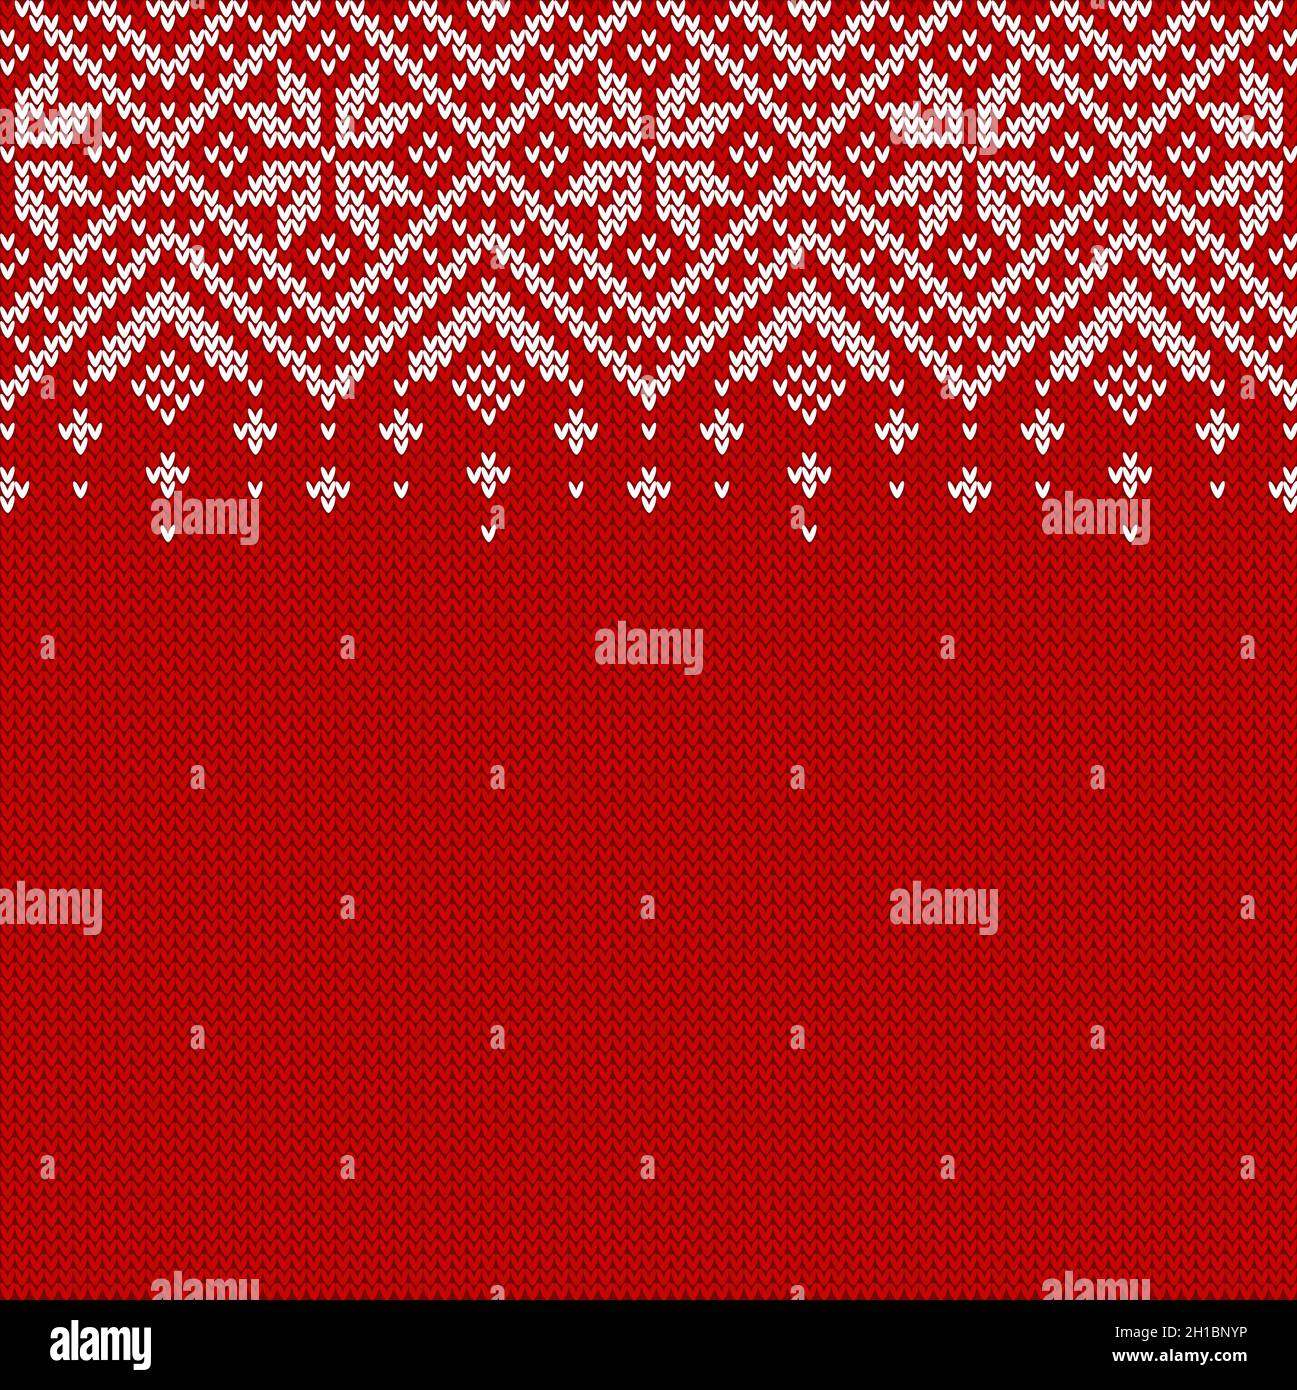 Knitted background with copyspace. Red and white sweater pattern for Christmas, New Year or winter design. Scandinavian border ornament Stock Vector